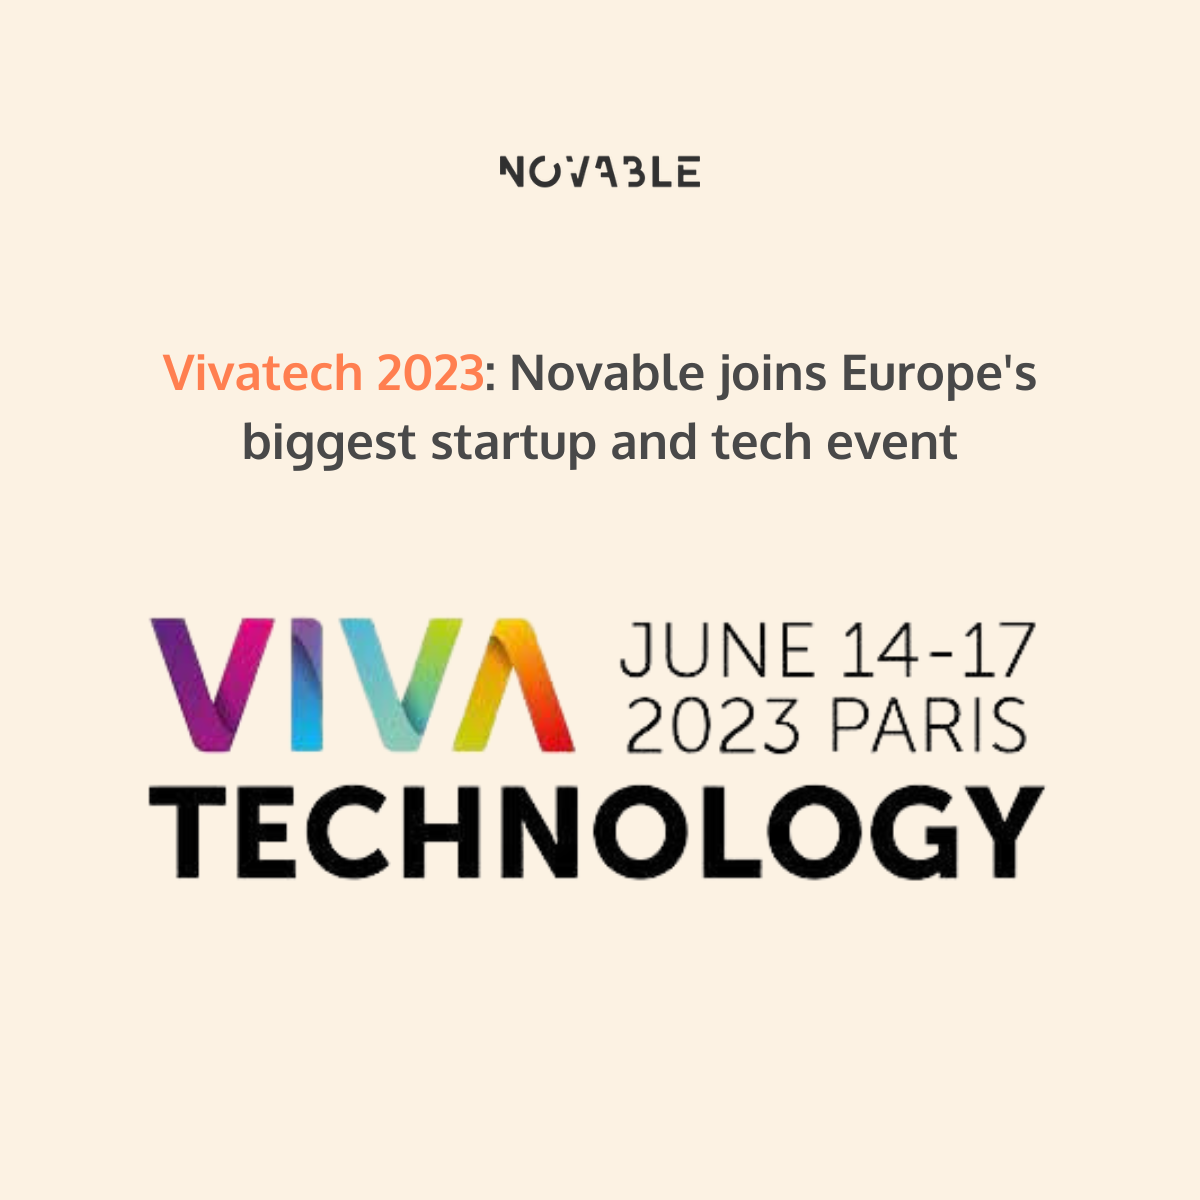 Vivatech 2023 Novable joins Europe's biggest startup and tech event